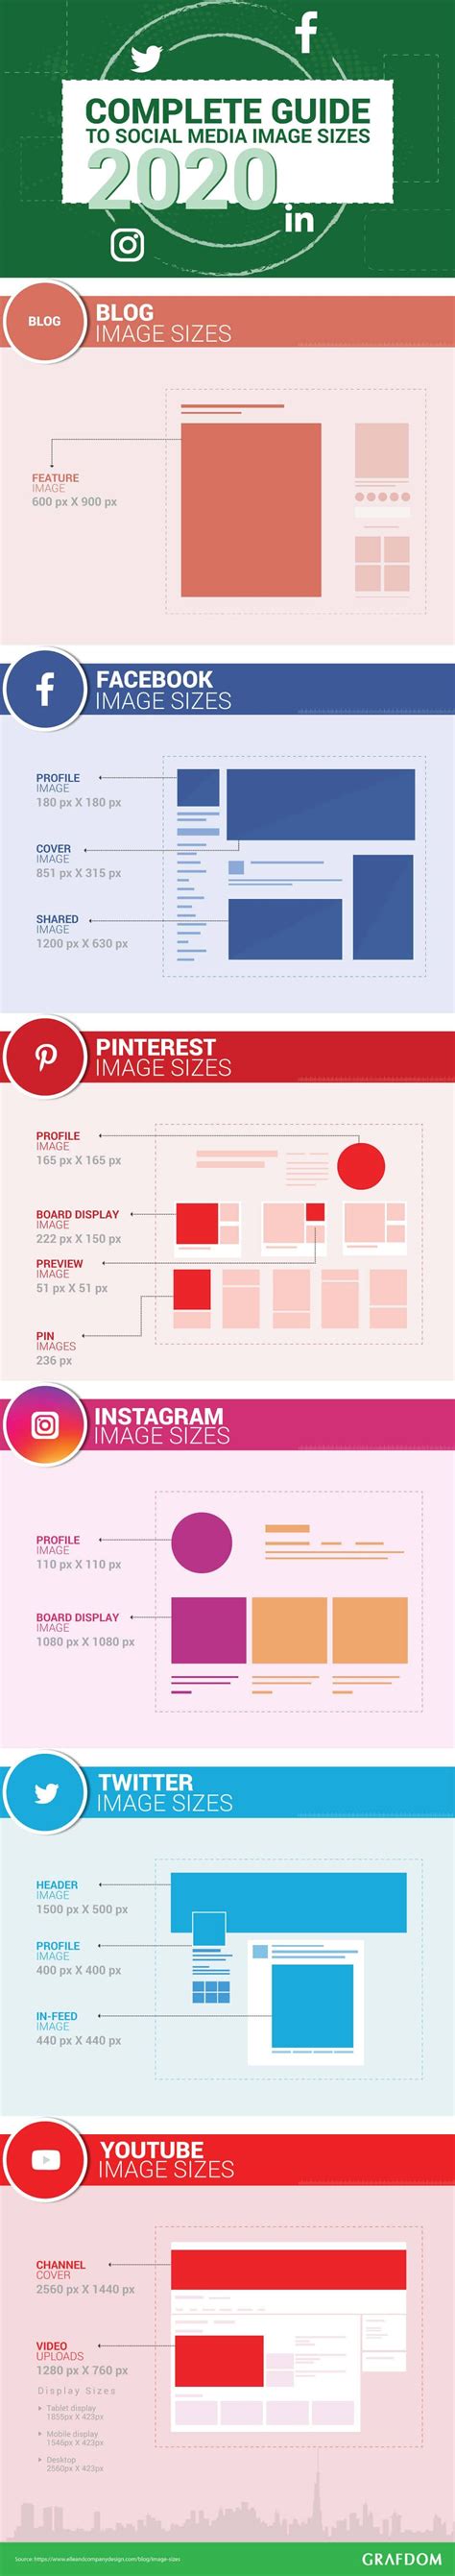 For instance, did you know that promoted posts that contain more than 20% text may receive lesser reach or get disapproved by facebook? Social Media Image Sizes - Cheat Sheet 2020 Complete # ...